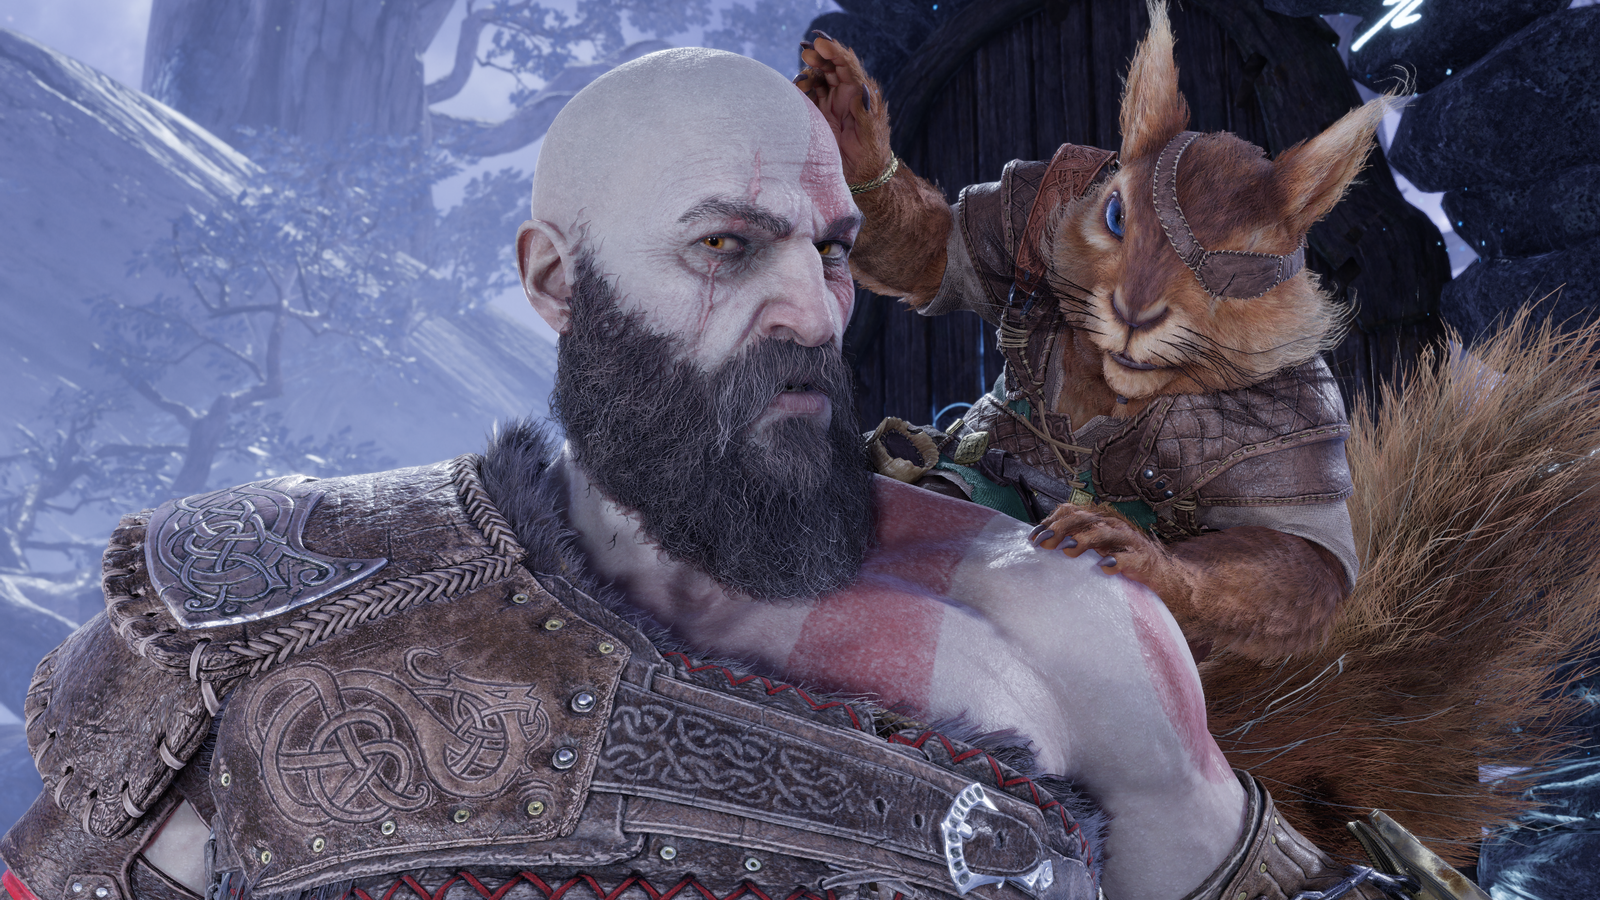 God Of War: 10 Things You Need To Know About The Main Characters